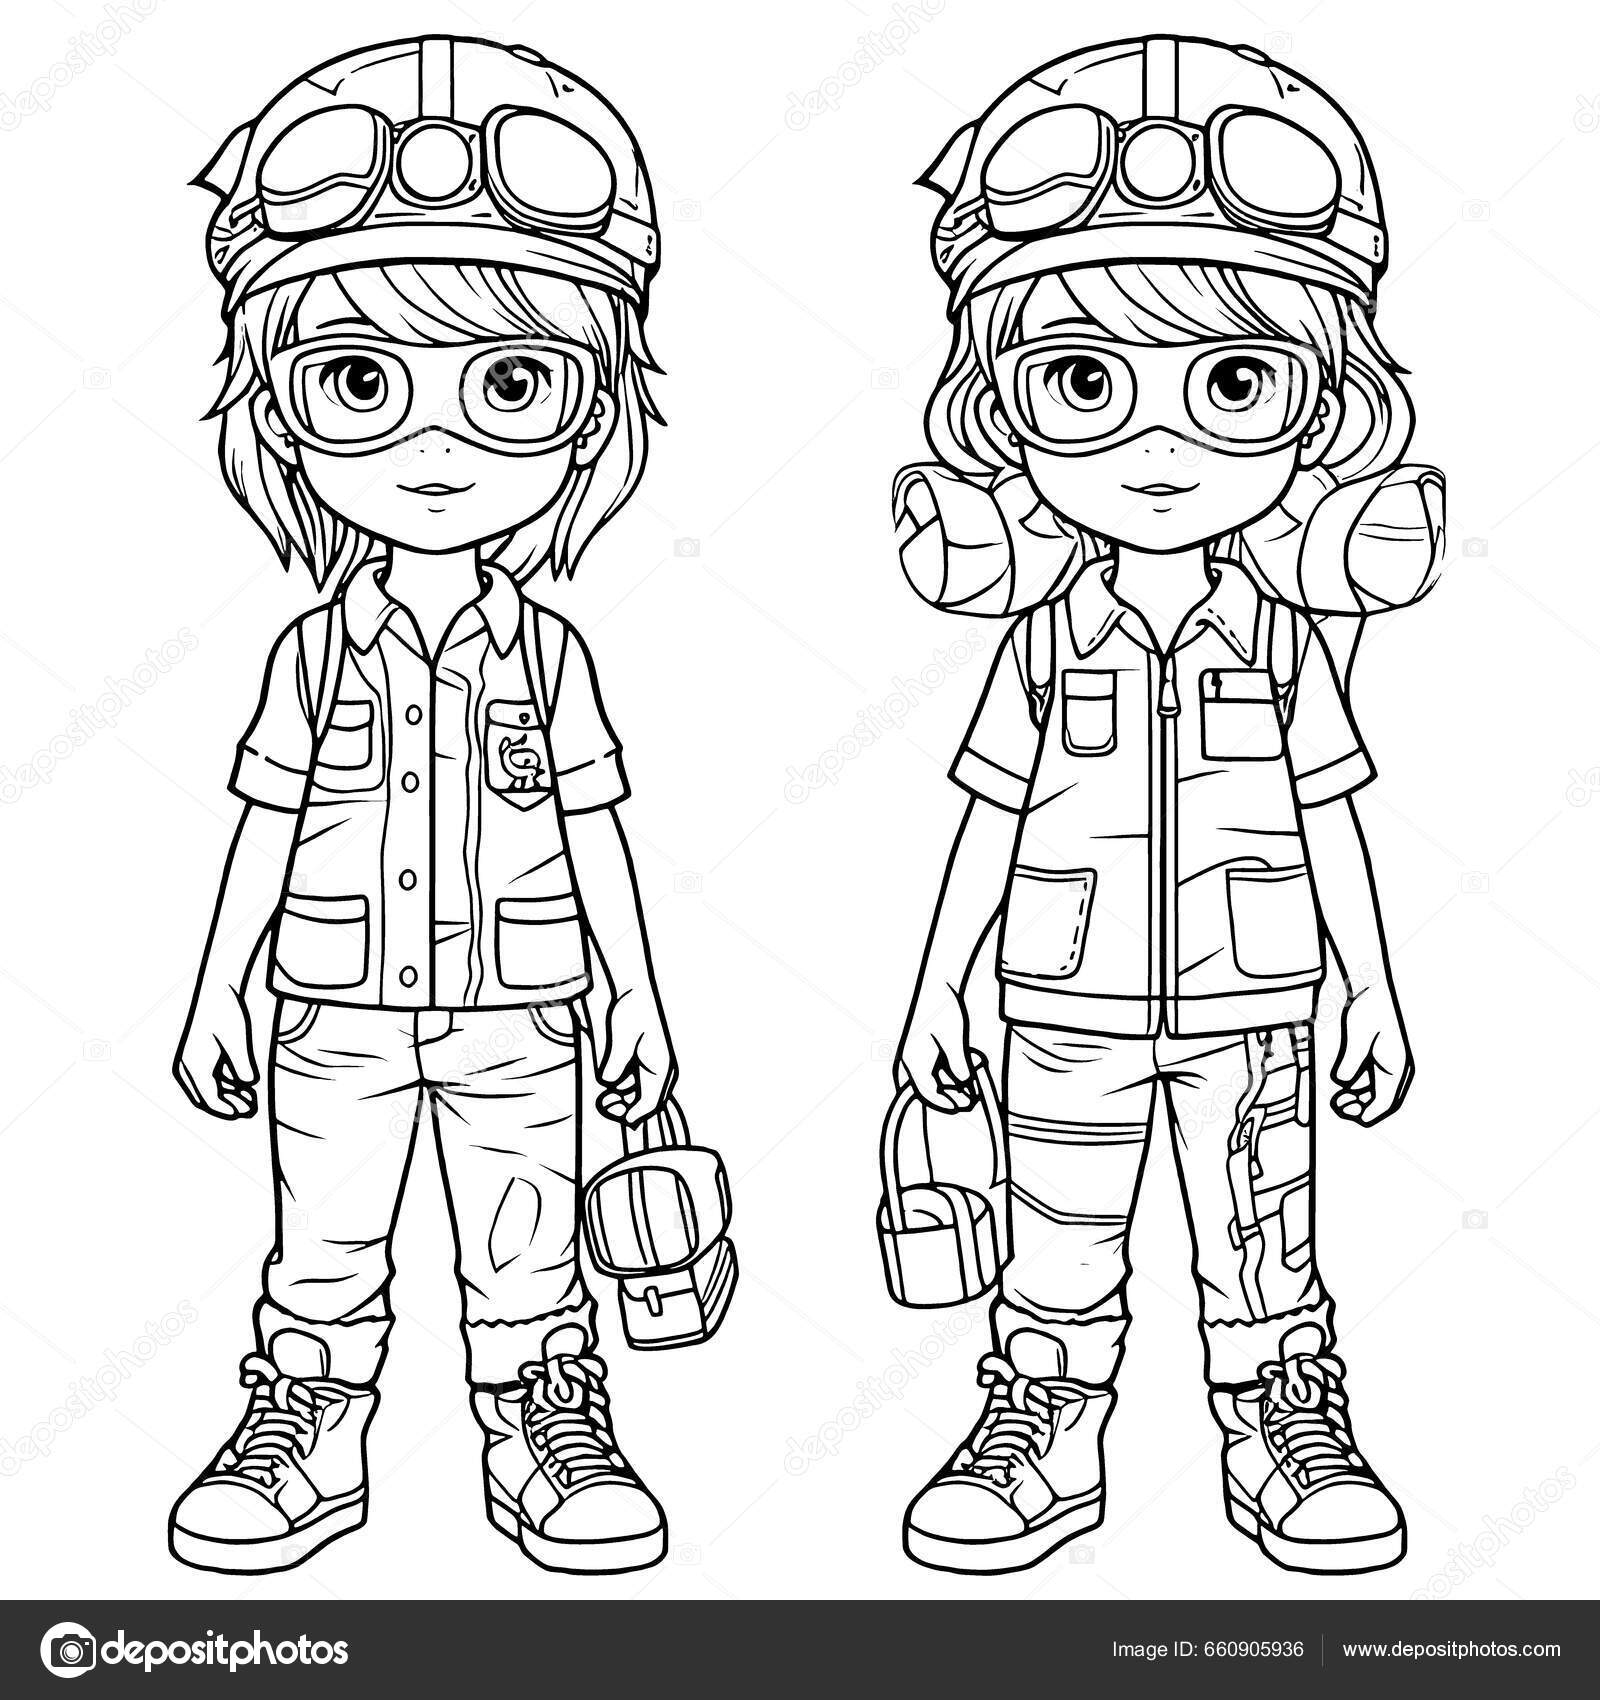 Engineer black white coloring pages kids simple lines cartoon style stock photo by george